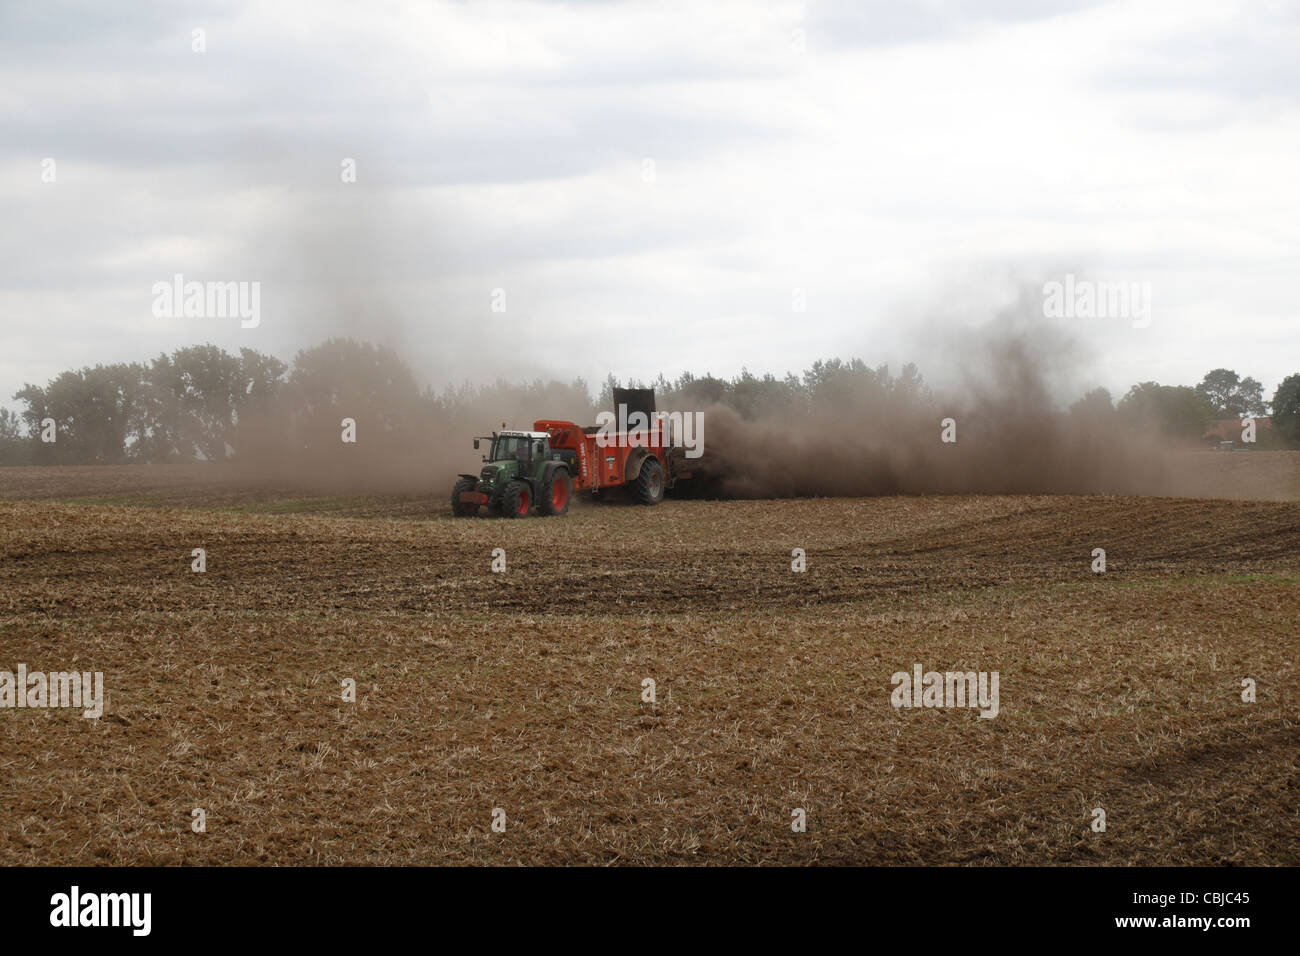 Tractor with Sodimac manure spreader (epandeur de fumier) spreading manure on an uncultivated field in northern France. Stock Photo